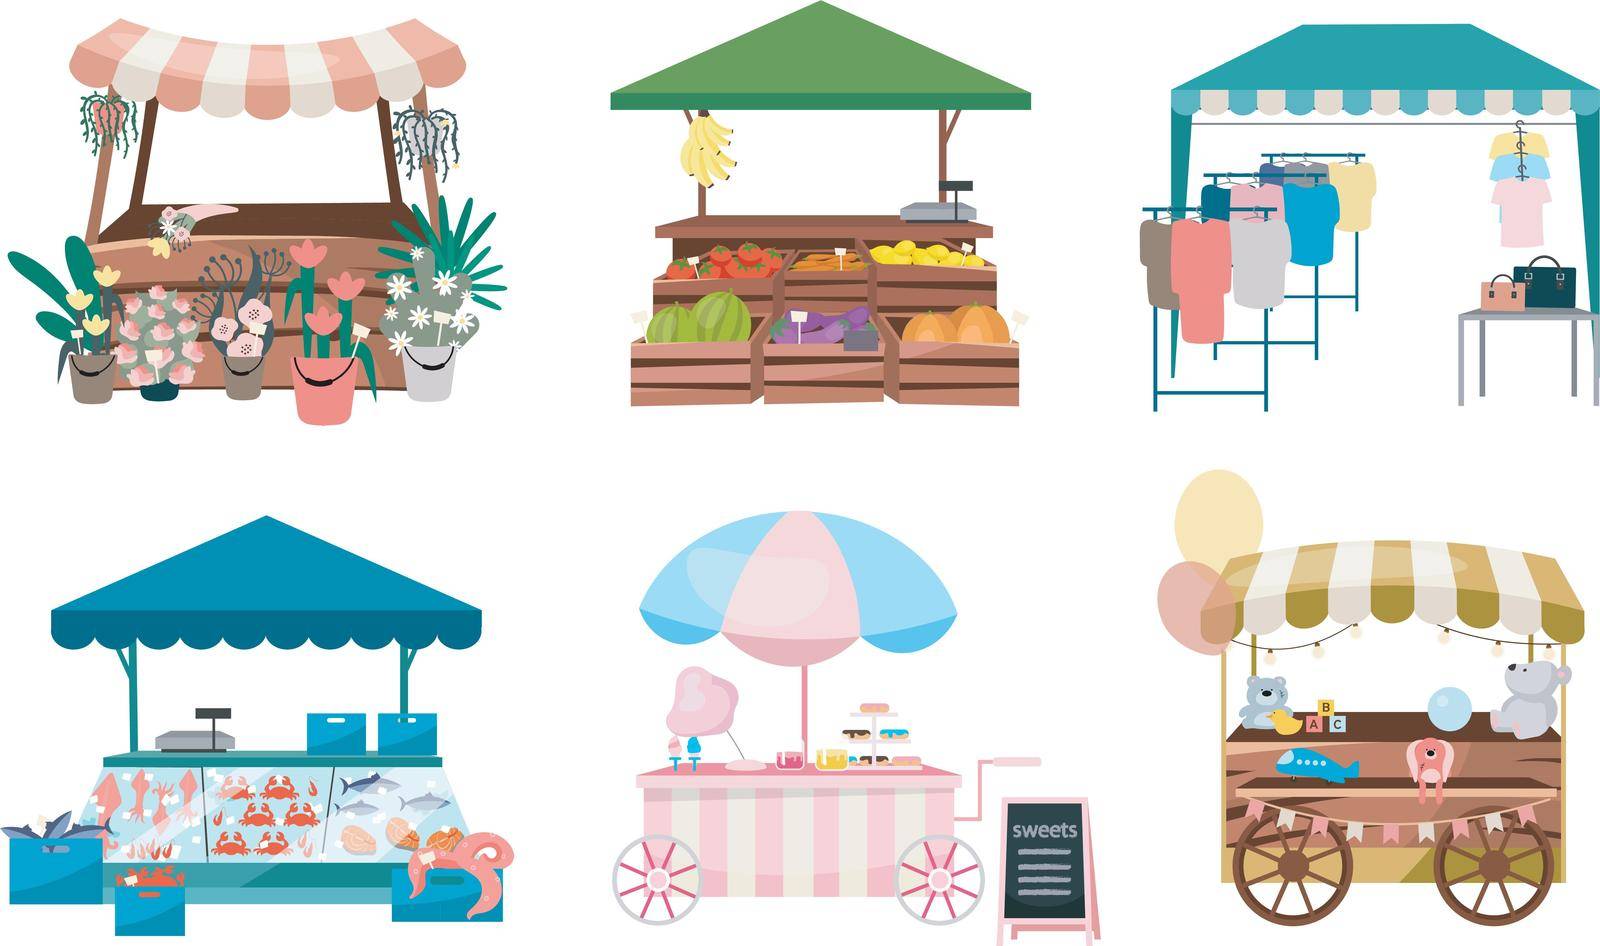 Market stalls flat vector illustrations set. Fair, funfair trade tents, outdoor kiosks and carts. Street shopping places cartoon concepts. Summer market counters for flowers, vegetables, clothes goods